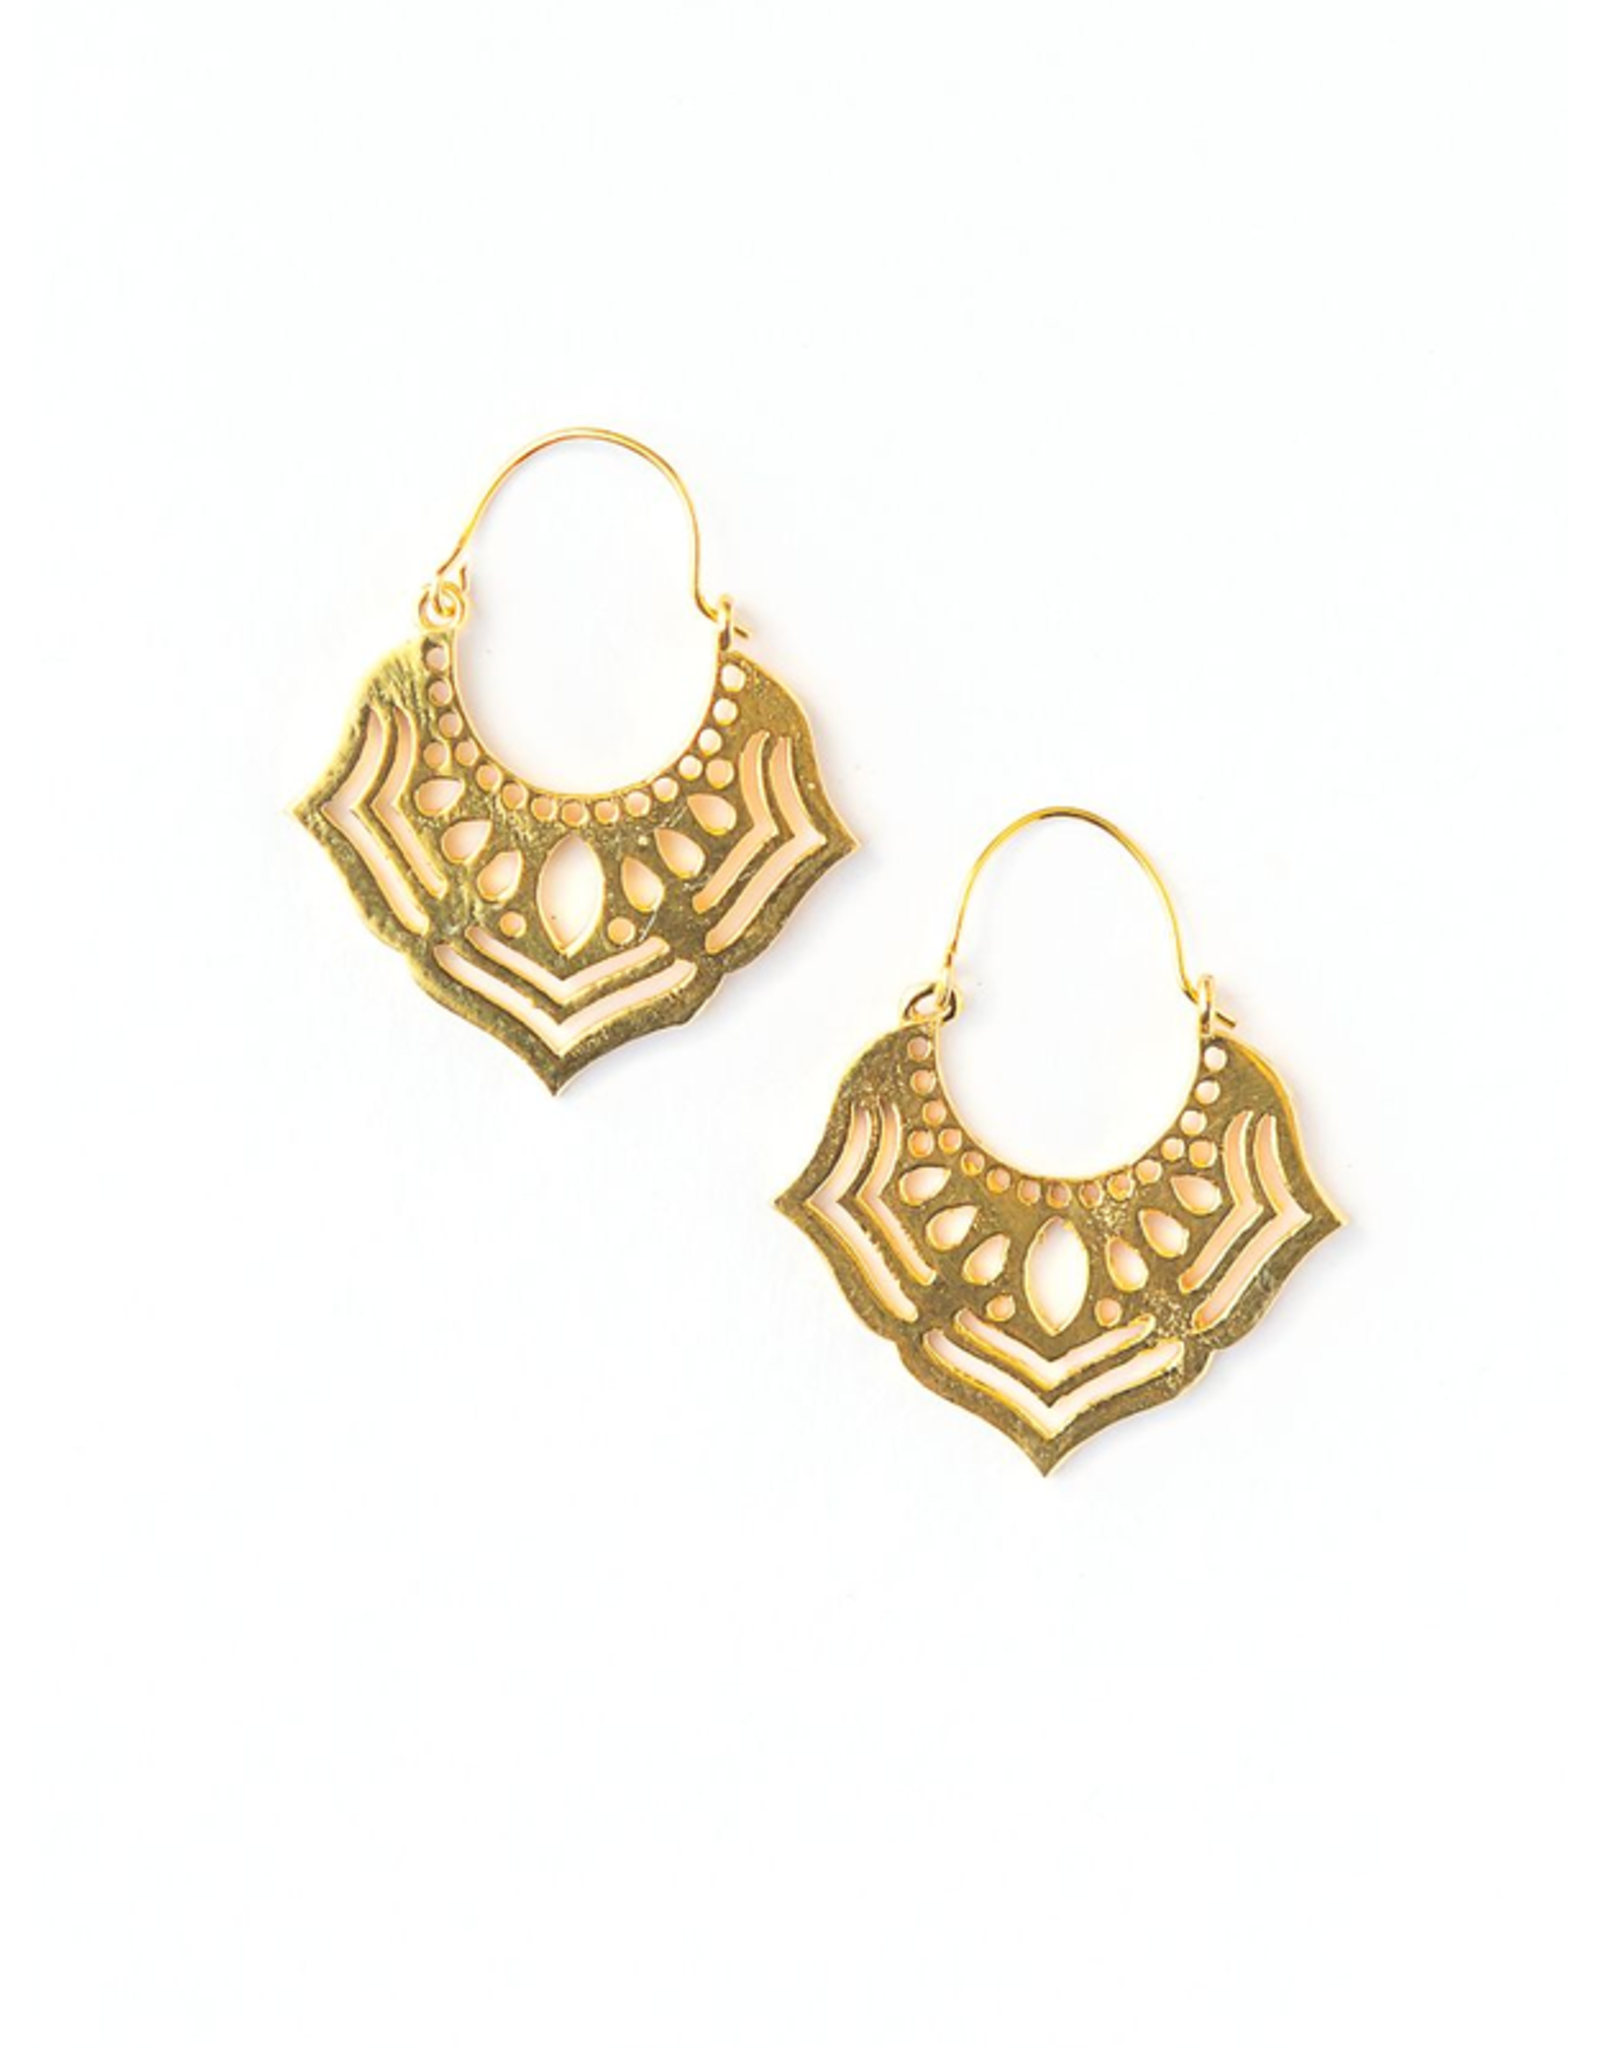 India Ornate Orchid Earrings - Brass, India